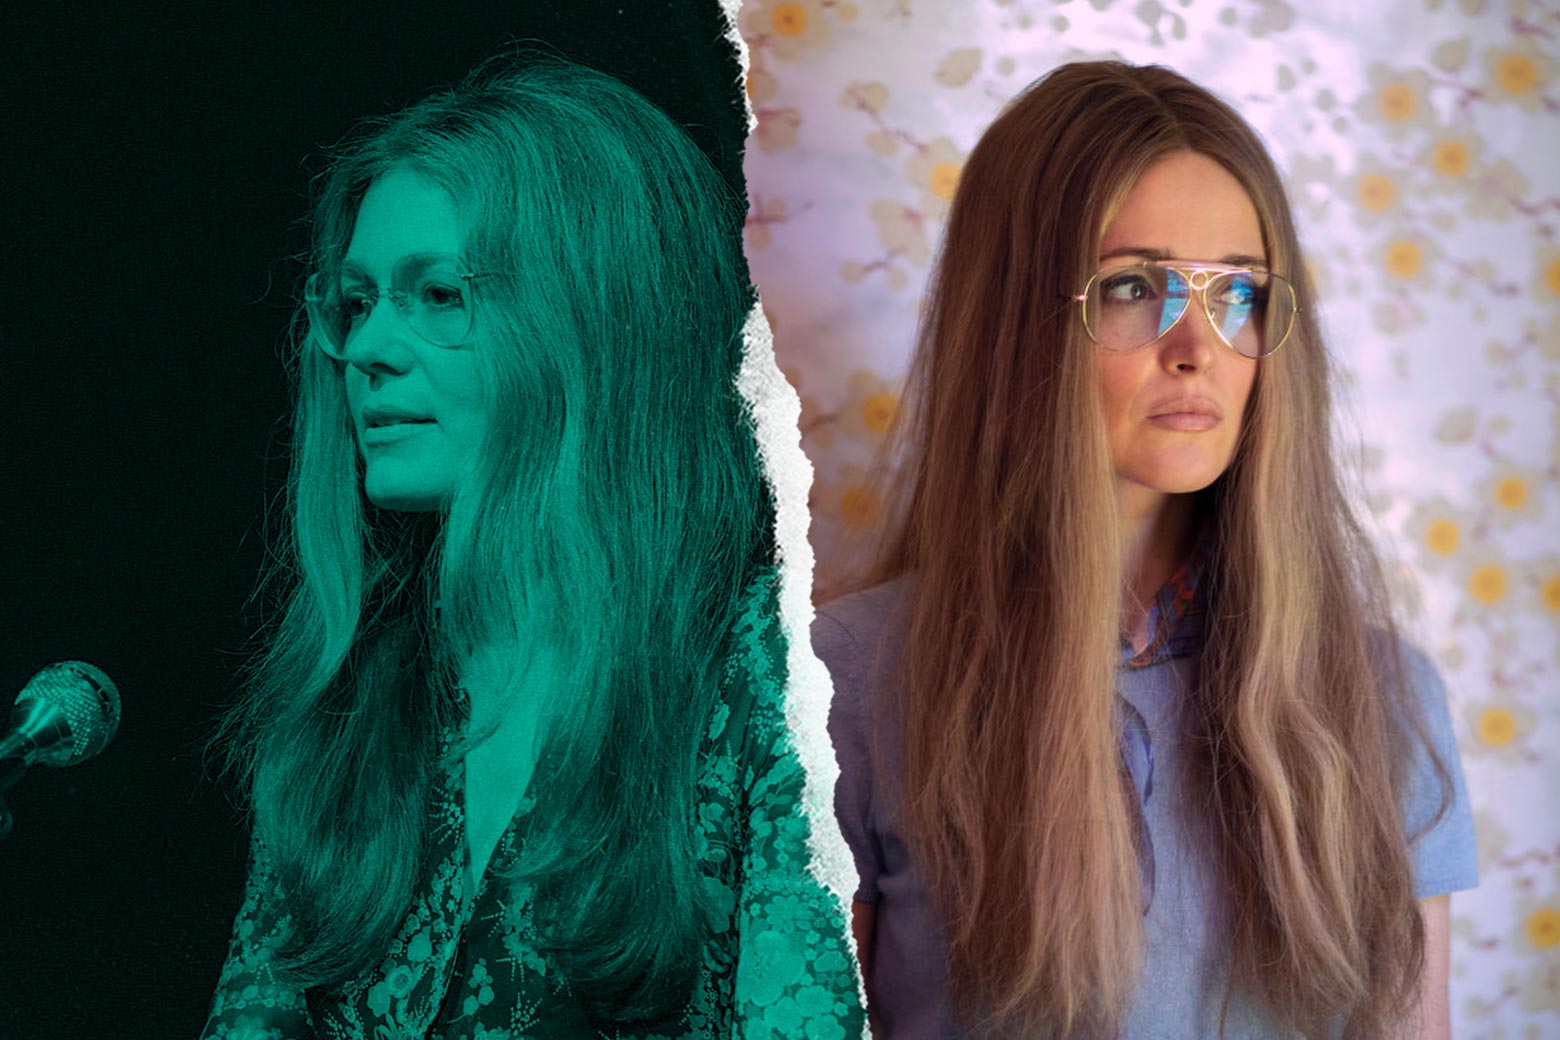 A side-by-side of both women, looking strikingly similar in long hair with their hair parted down the middle